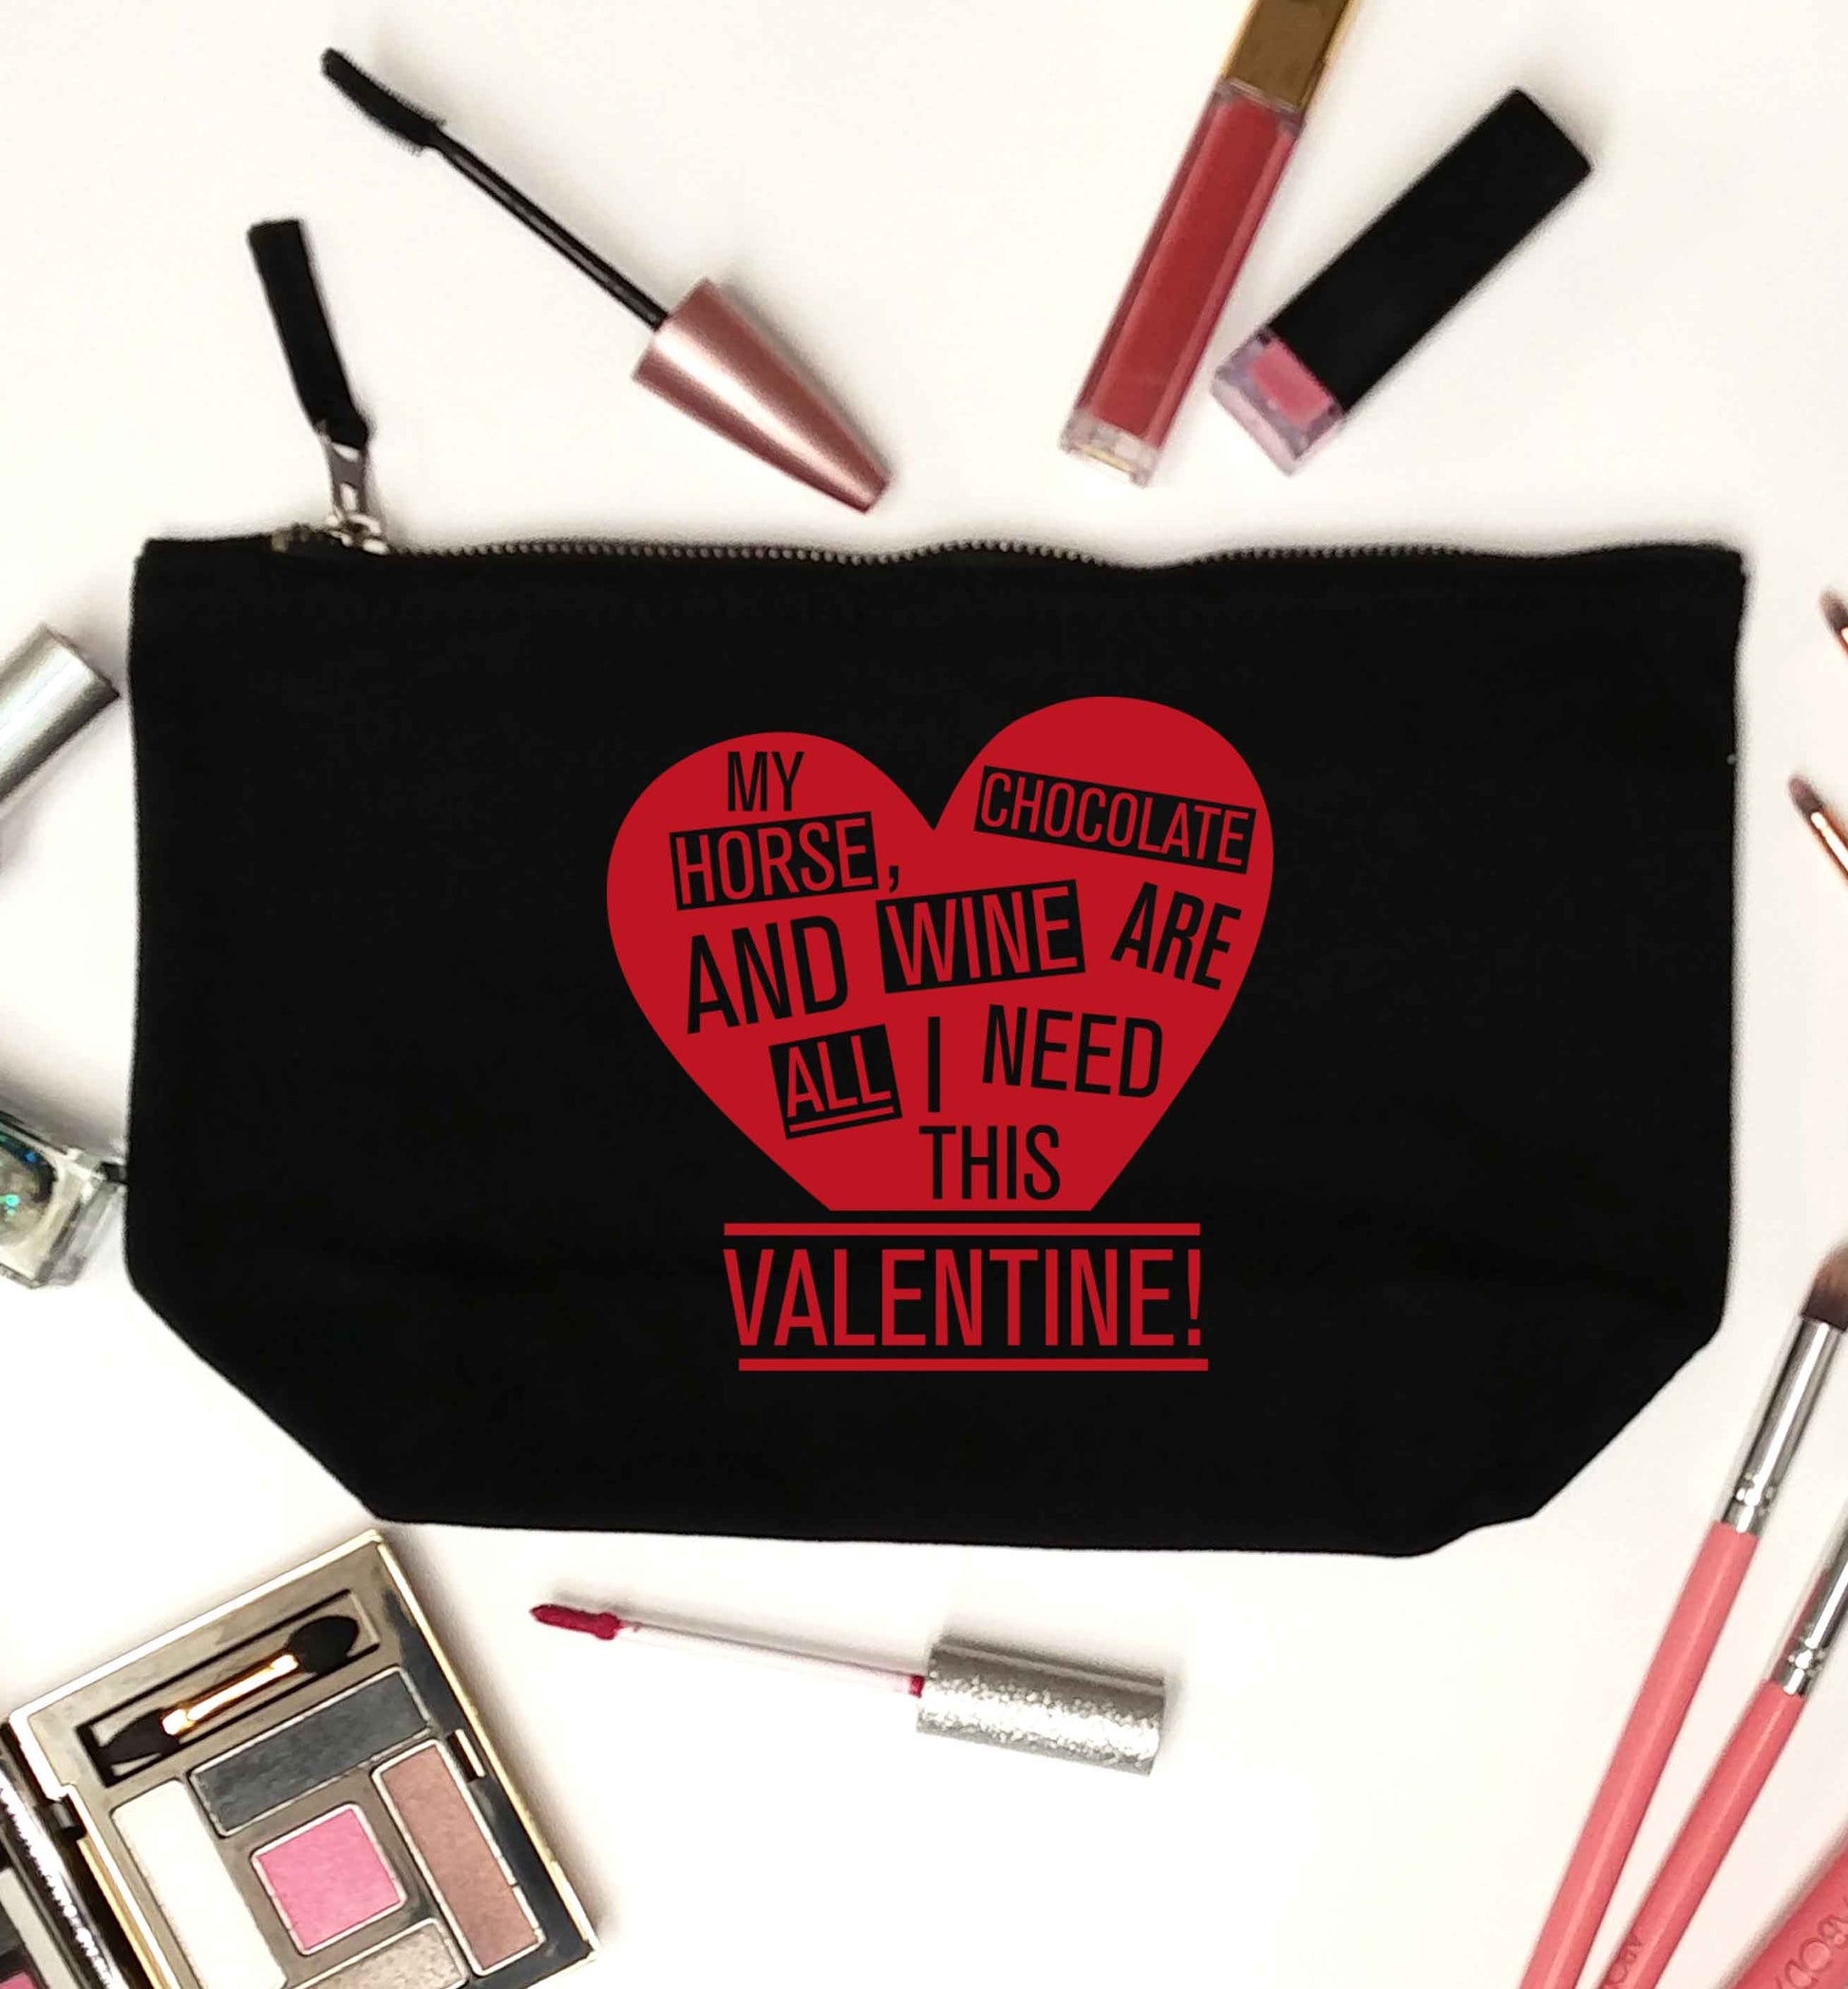 My horse chocolate and wine are all I need this valentine black makeup bag